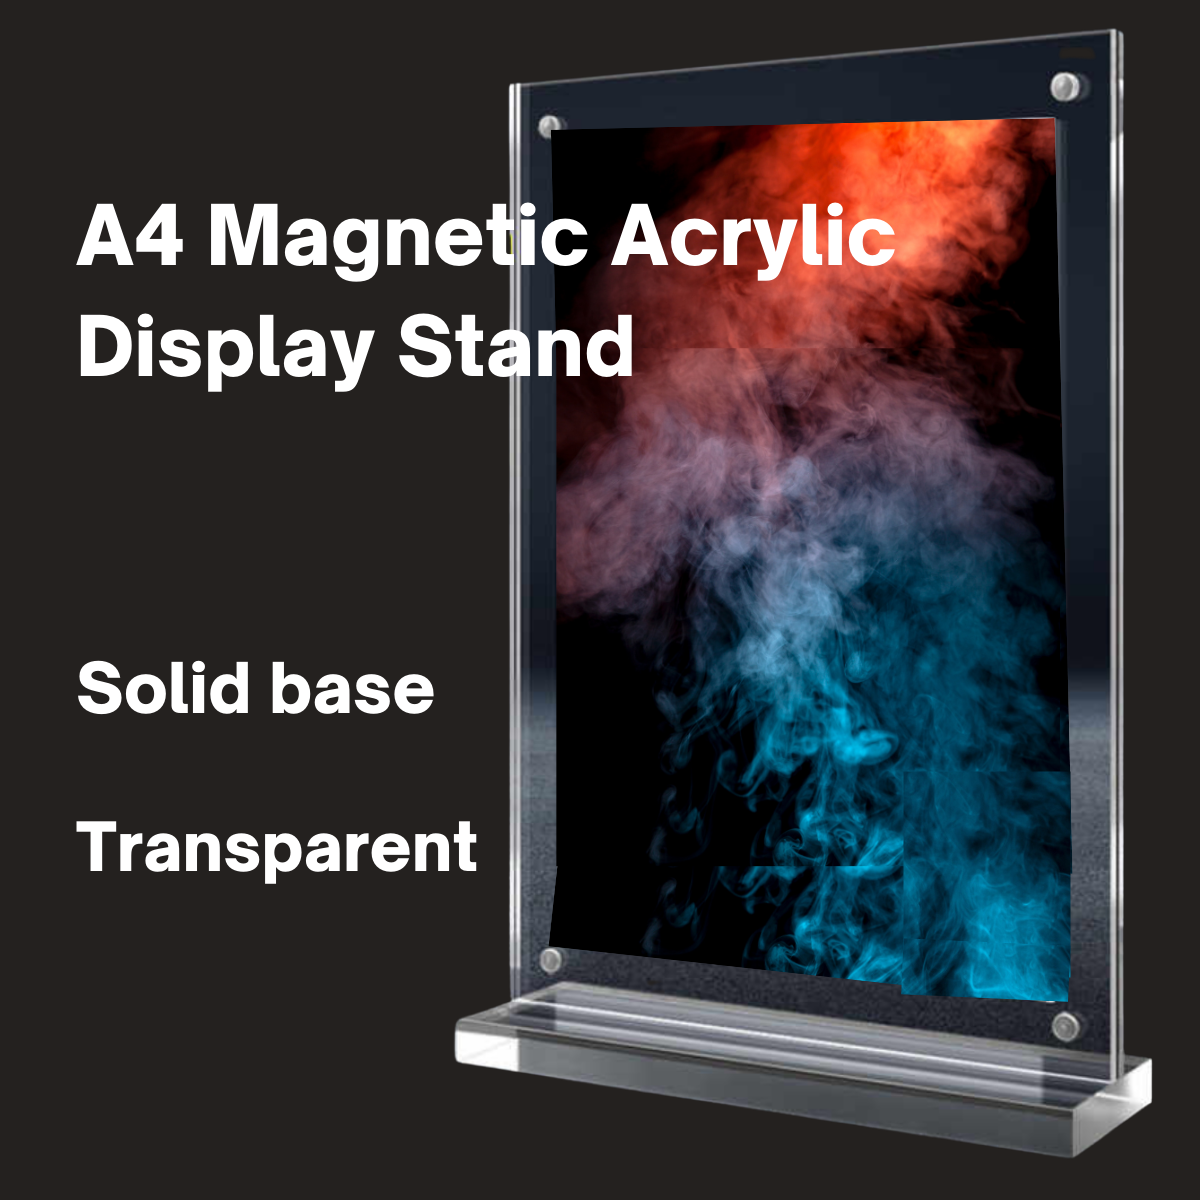 A4 Magnetic Acrylic Display Stand 